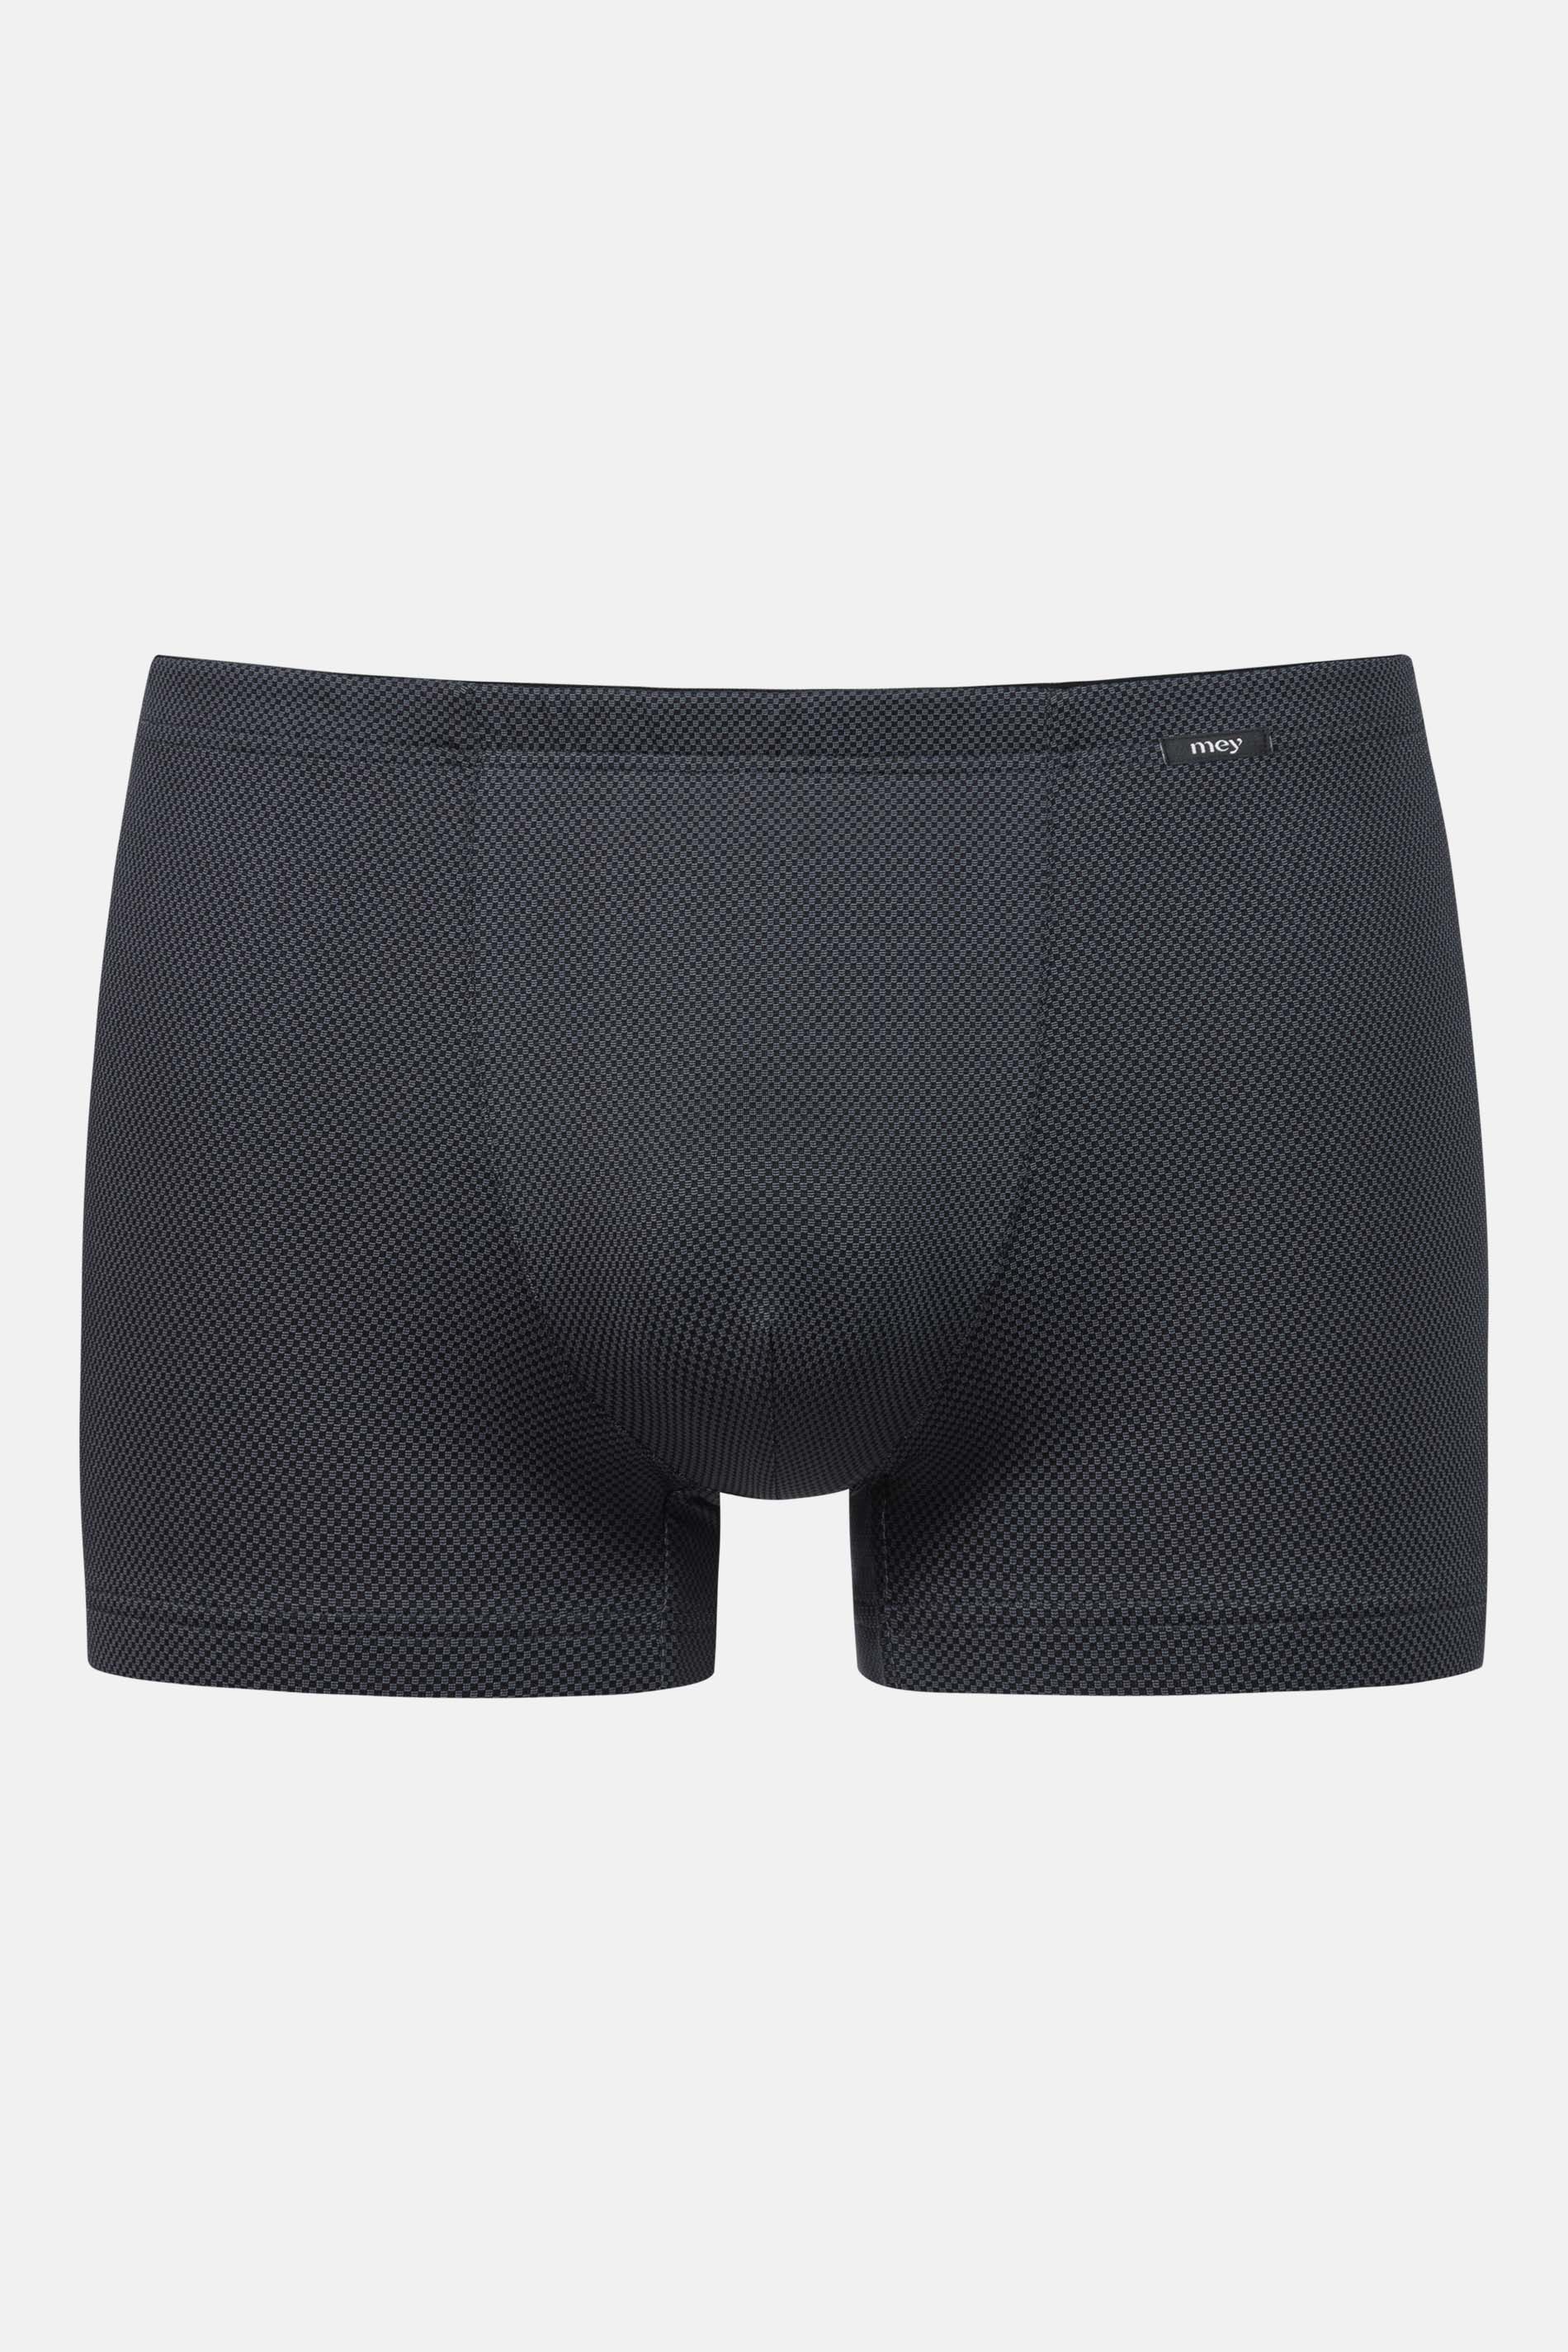 Shorty Serie BC Knitted Geo Uitknippen | mey®